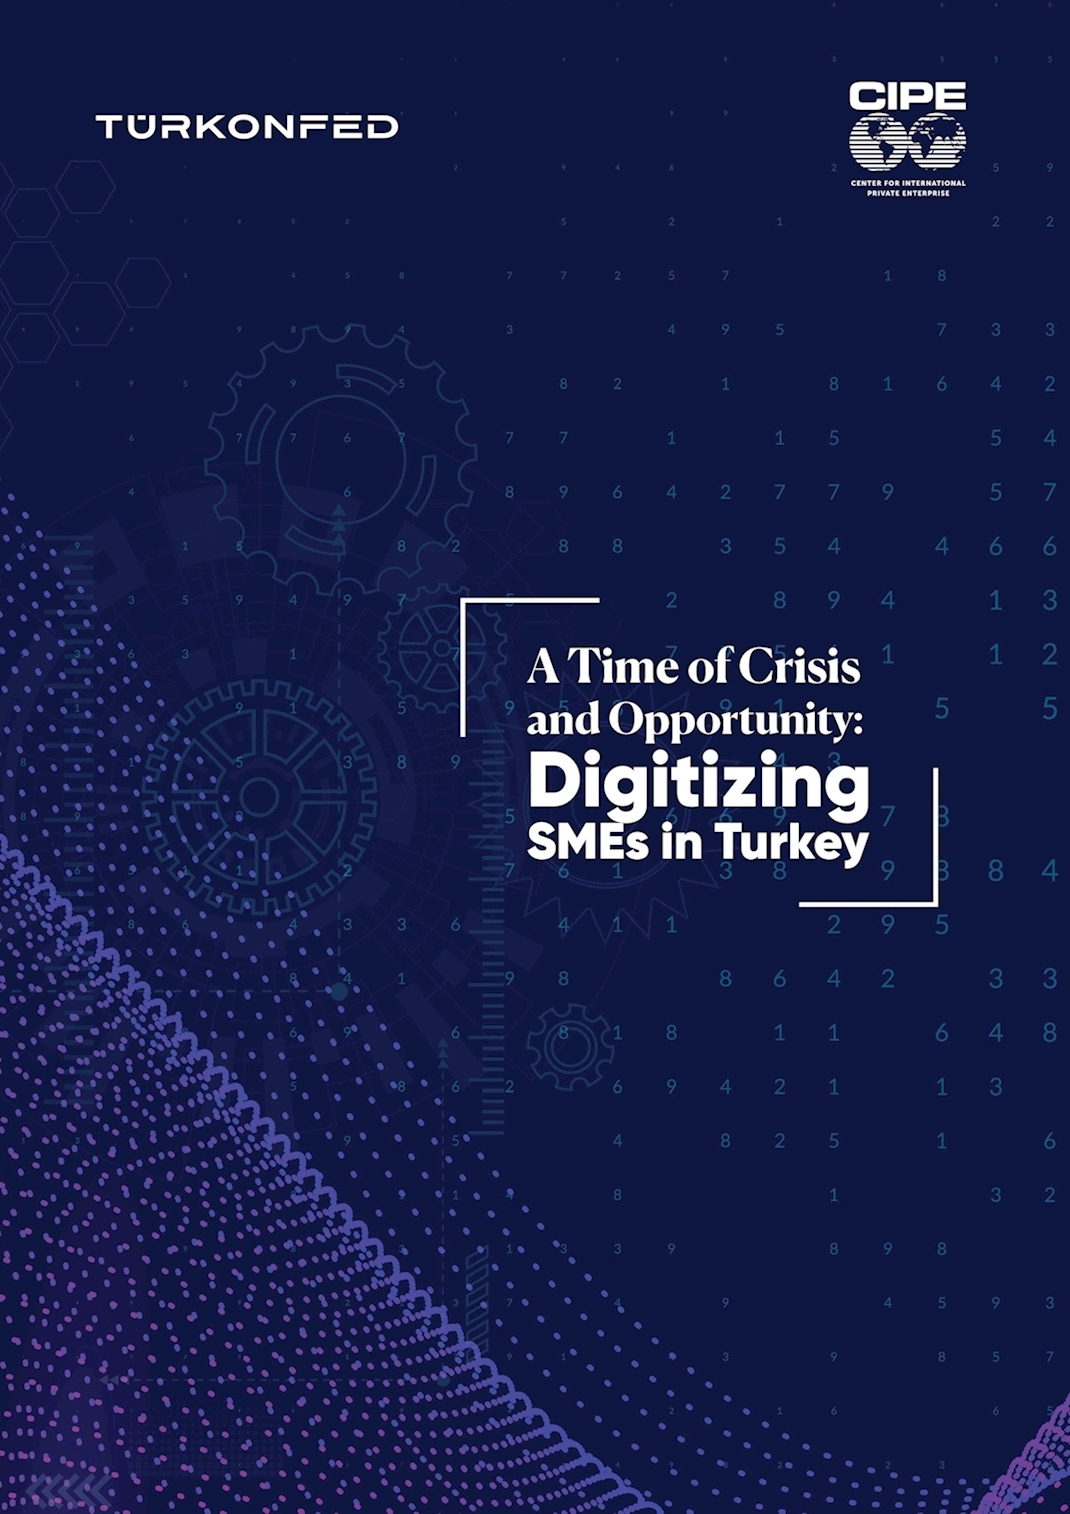 A Time of Crisis and Opportunity Digitizing SMEs in Turkey